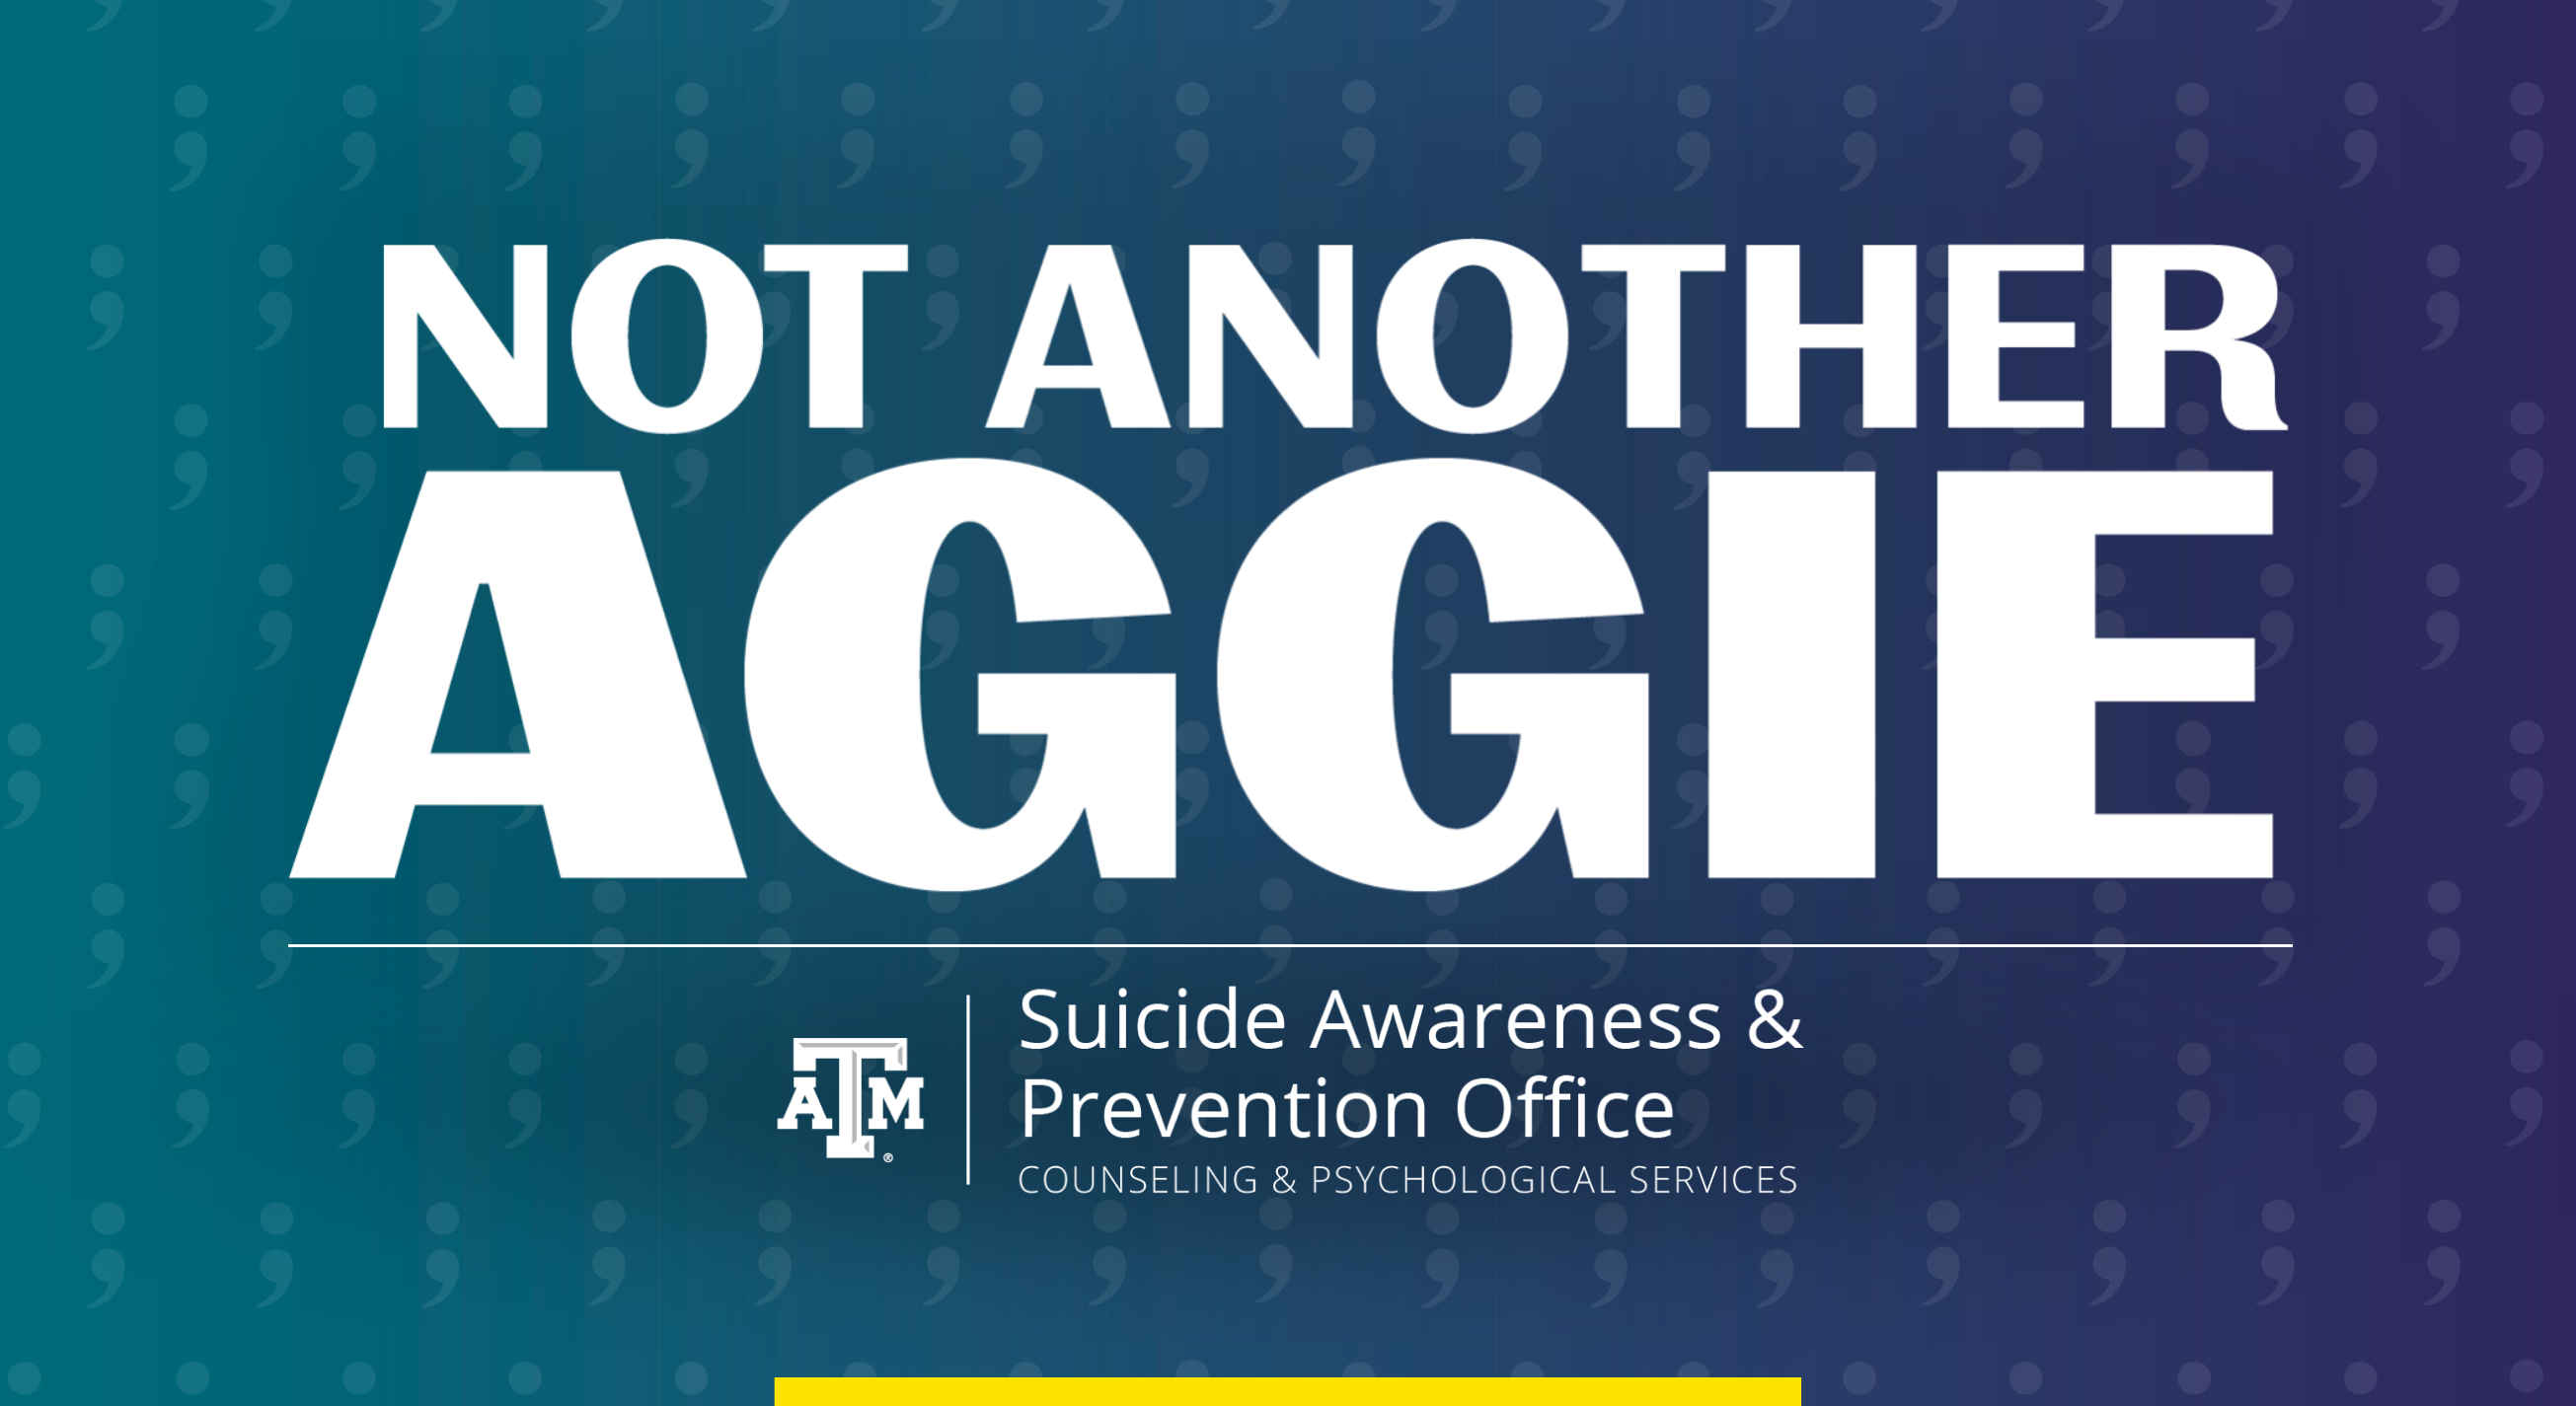 Not Another Aggie: Suicide Awareness & Prevention Office, Texas A&M University Counseling & Psychological Services. A subtle field of semicolons adorns an image decorated in teal and purple, the nationally recognized colors of suicide awareness and prevention efforts.